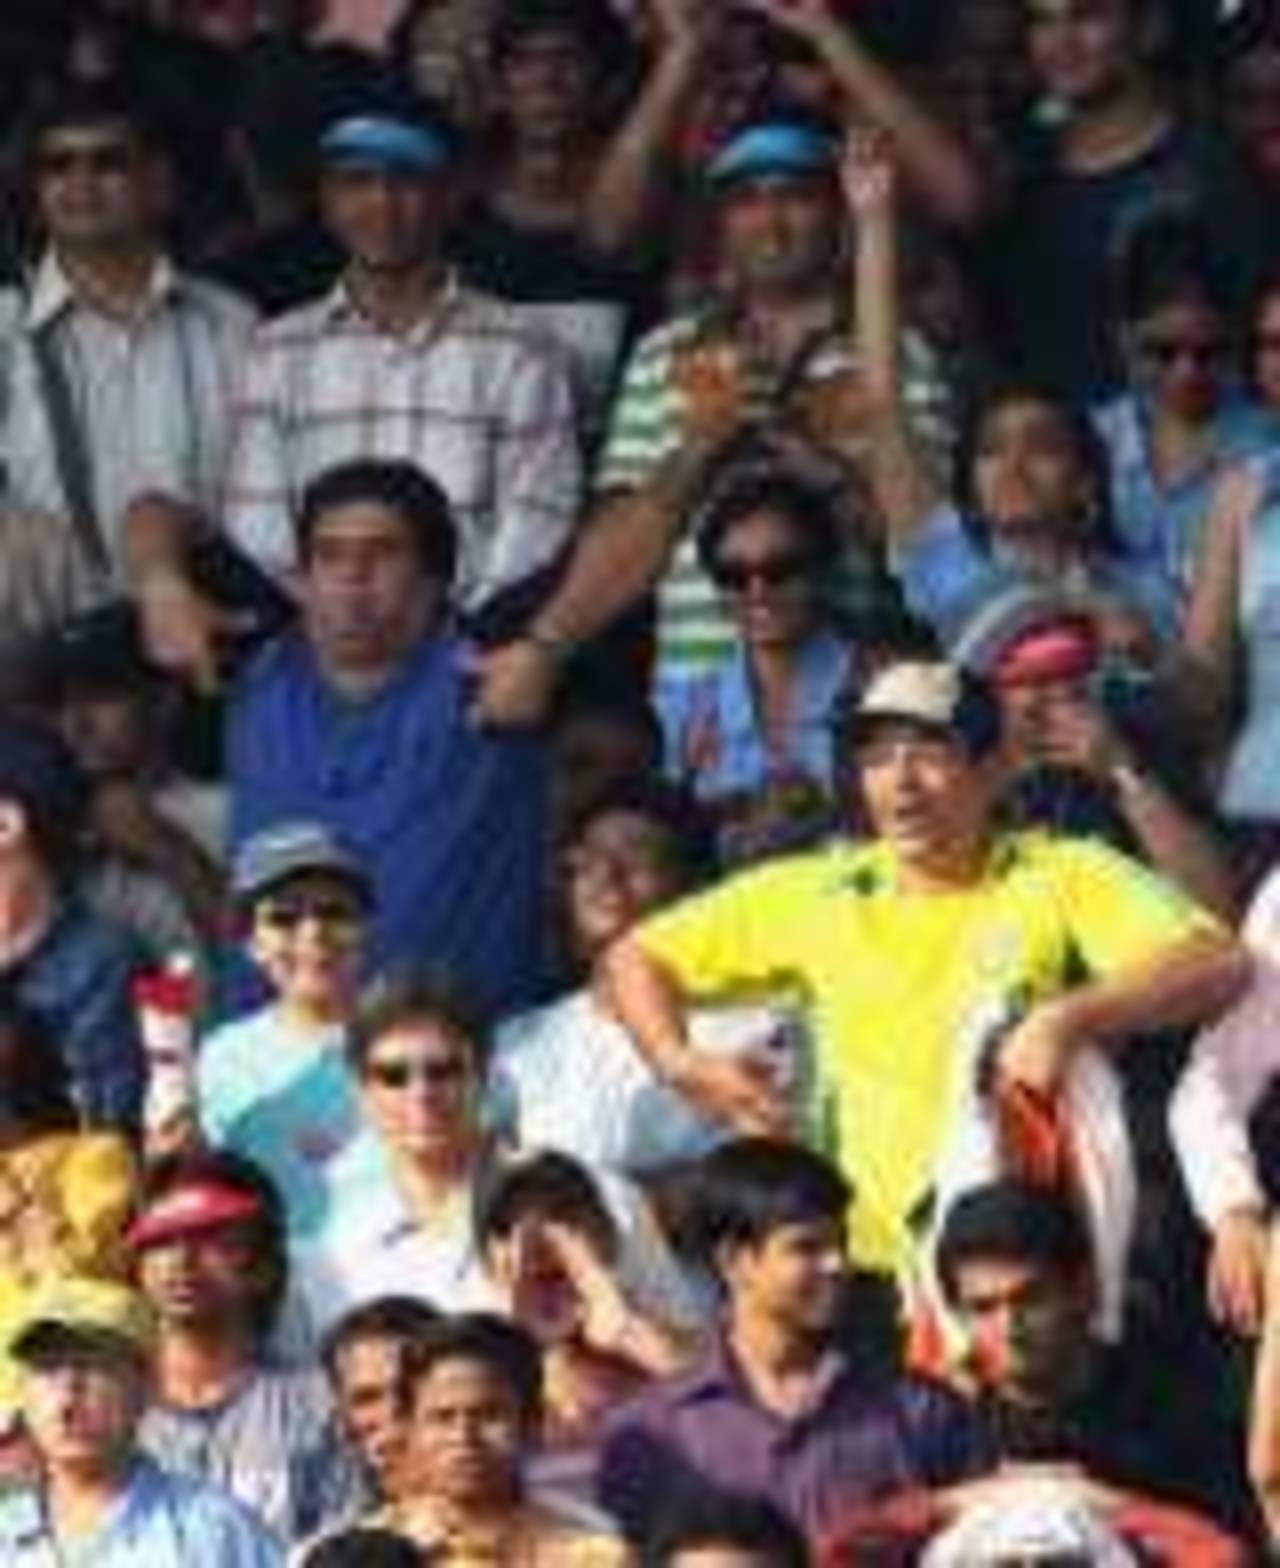 Spectators make 'monkey' impressions as Andrew Symonds of Australia comes in to bat during the seventh one day international match between India and Australia at Wankhede Stadium on October 17, 2007 in Mumbai, India